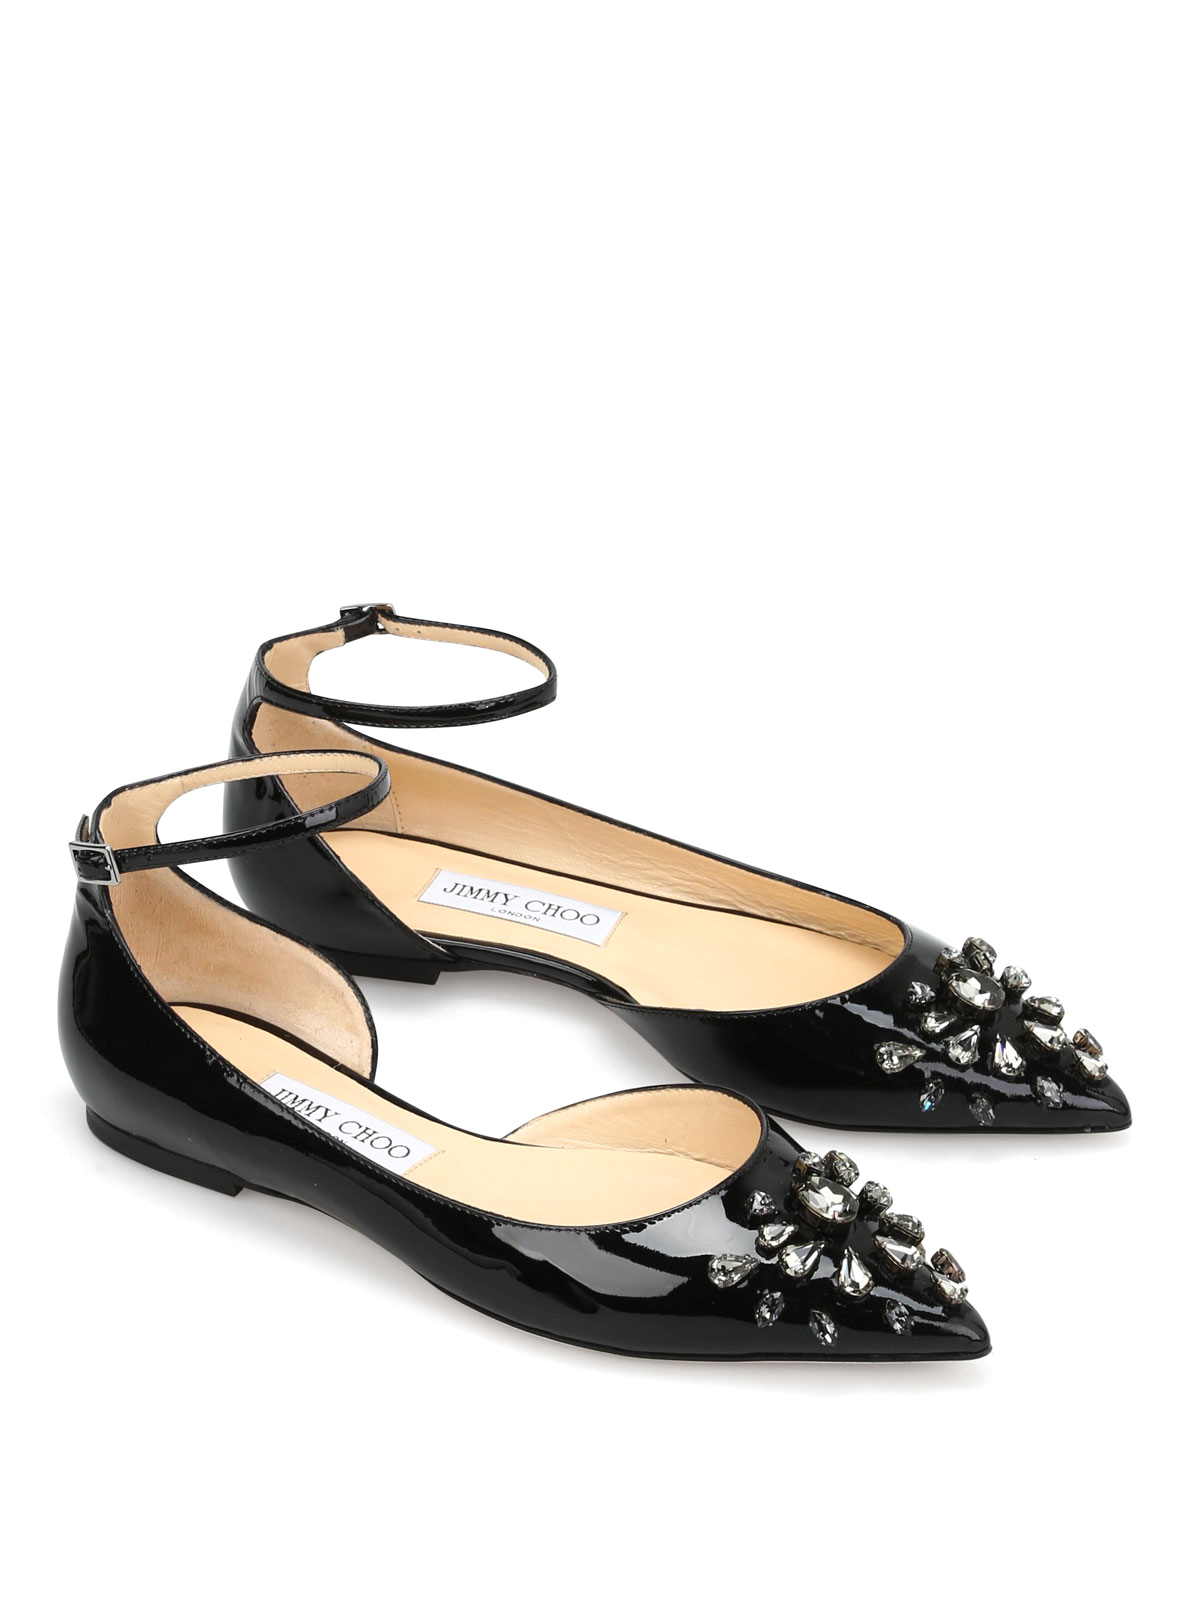 Lucy Flat jewel patent shoes by Jimmy Choo - flat shoes | iKRIX